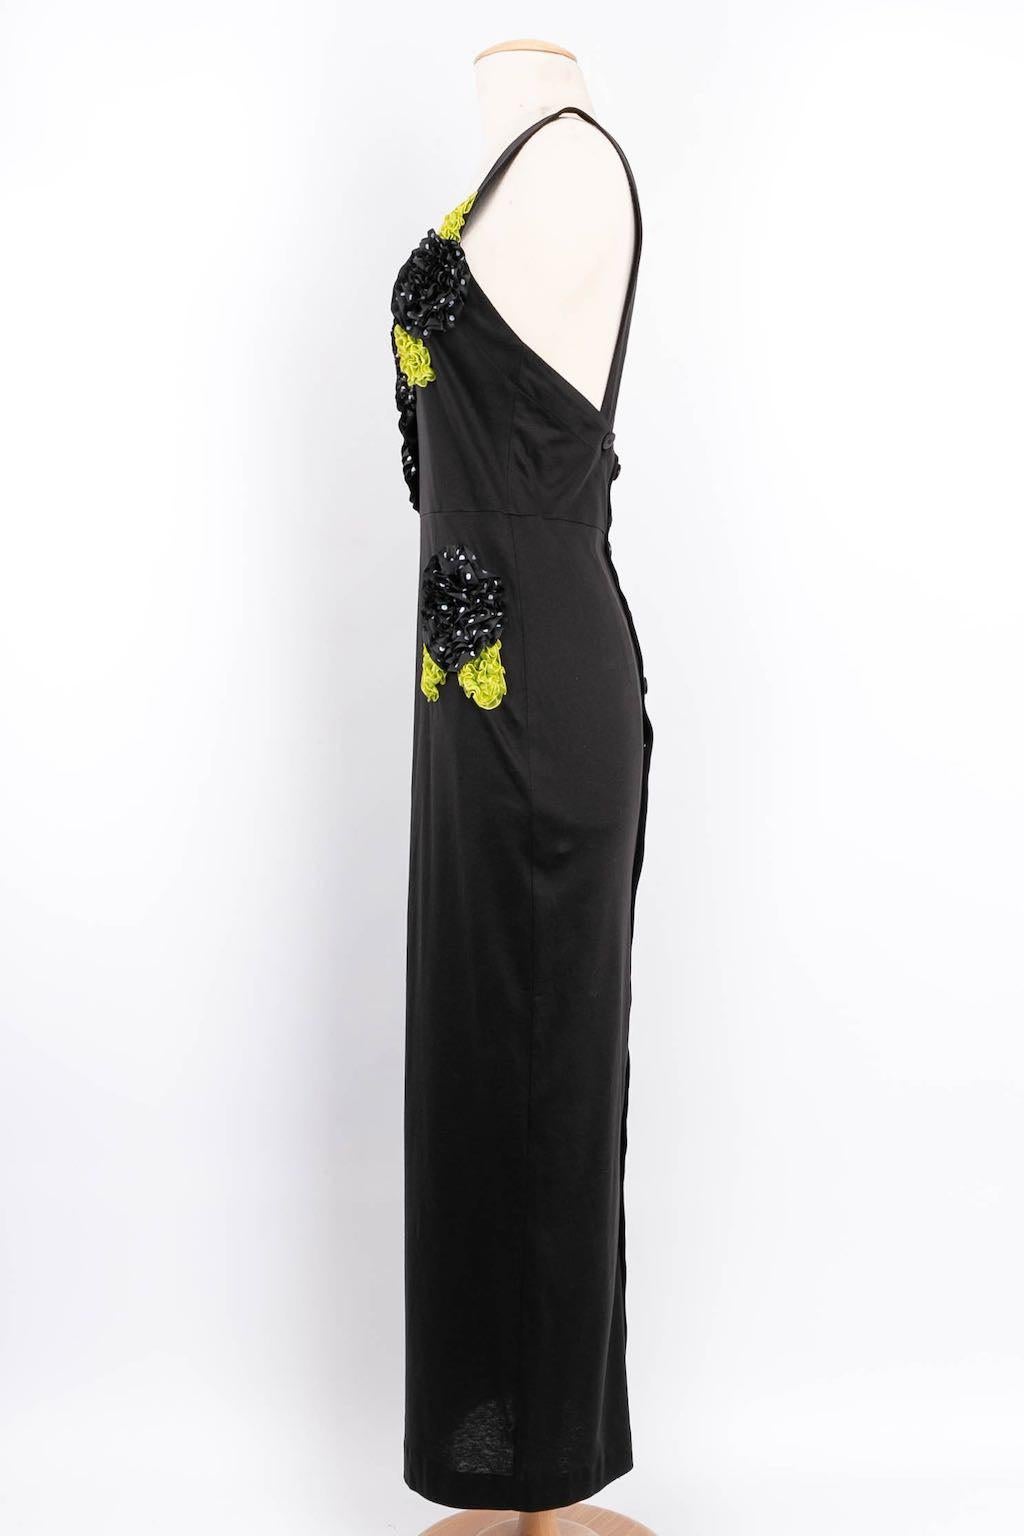 Chantal Thomass Cotton Dress Embroidered with Flowers Spring Collection, 1988 For Sale 7